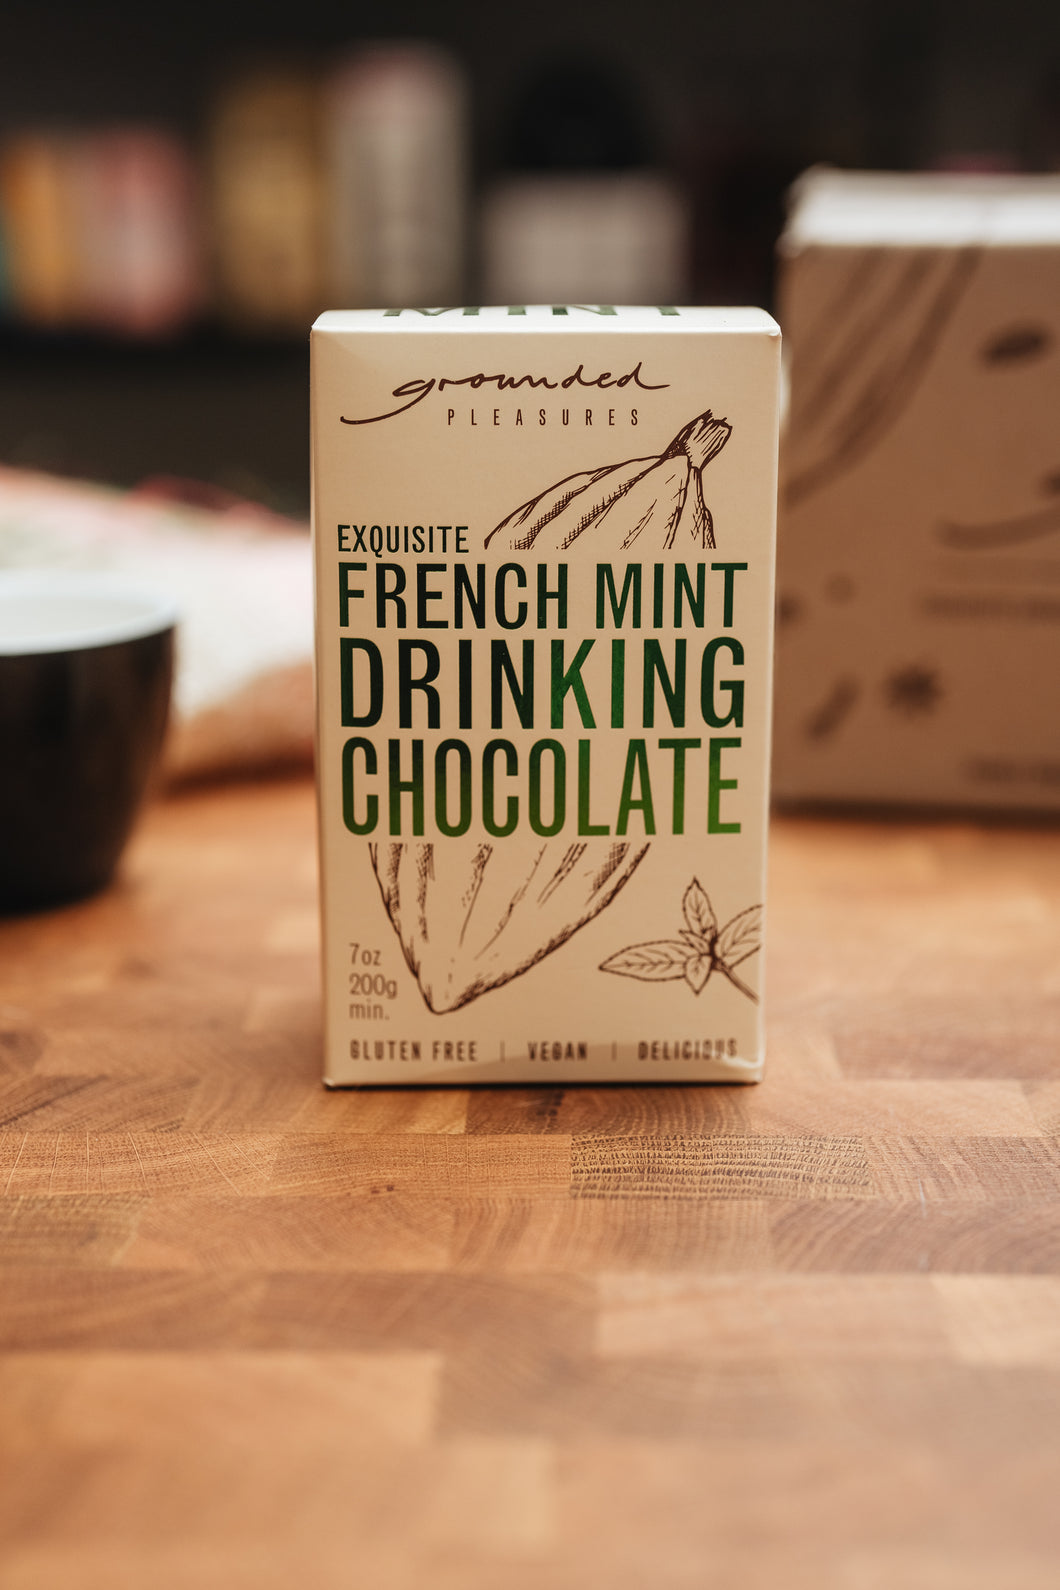 French Mint Drinking Chocolate - Grounded Pleasures